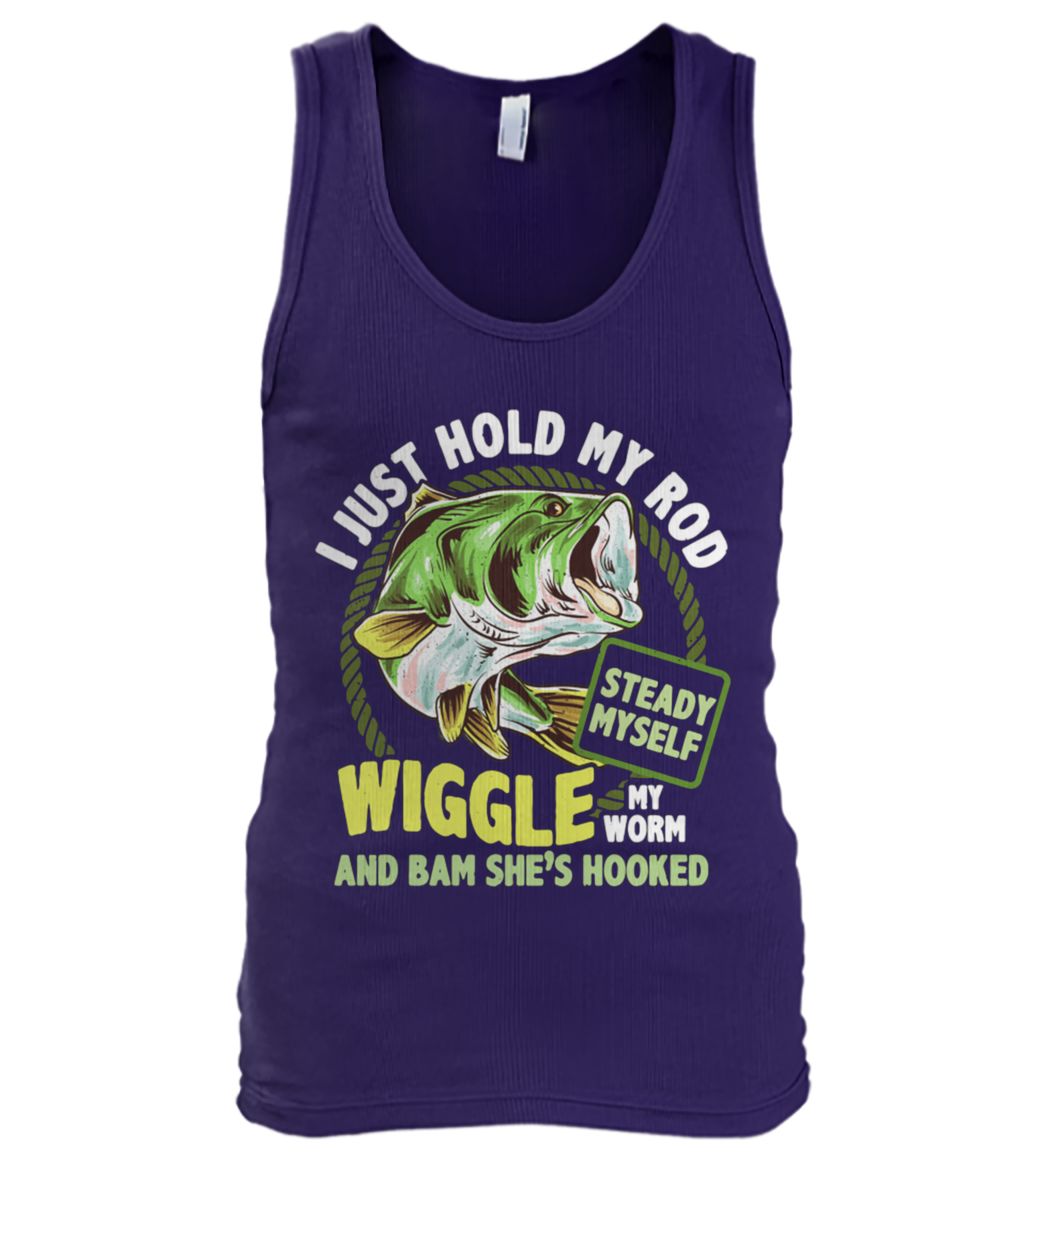 Fishing I just hold my rod steady myself wiggle my worm and bam she’s hooked men's tank top